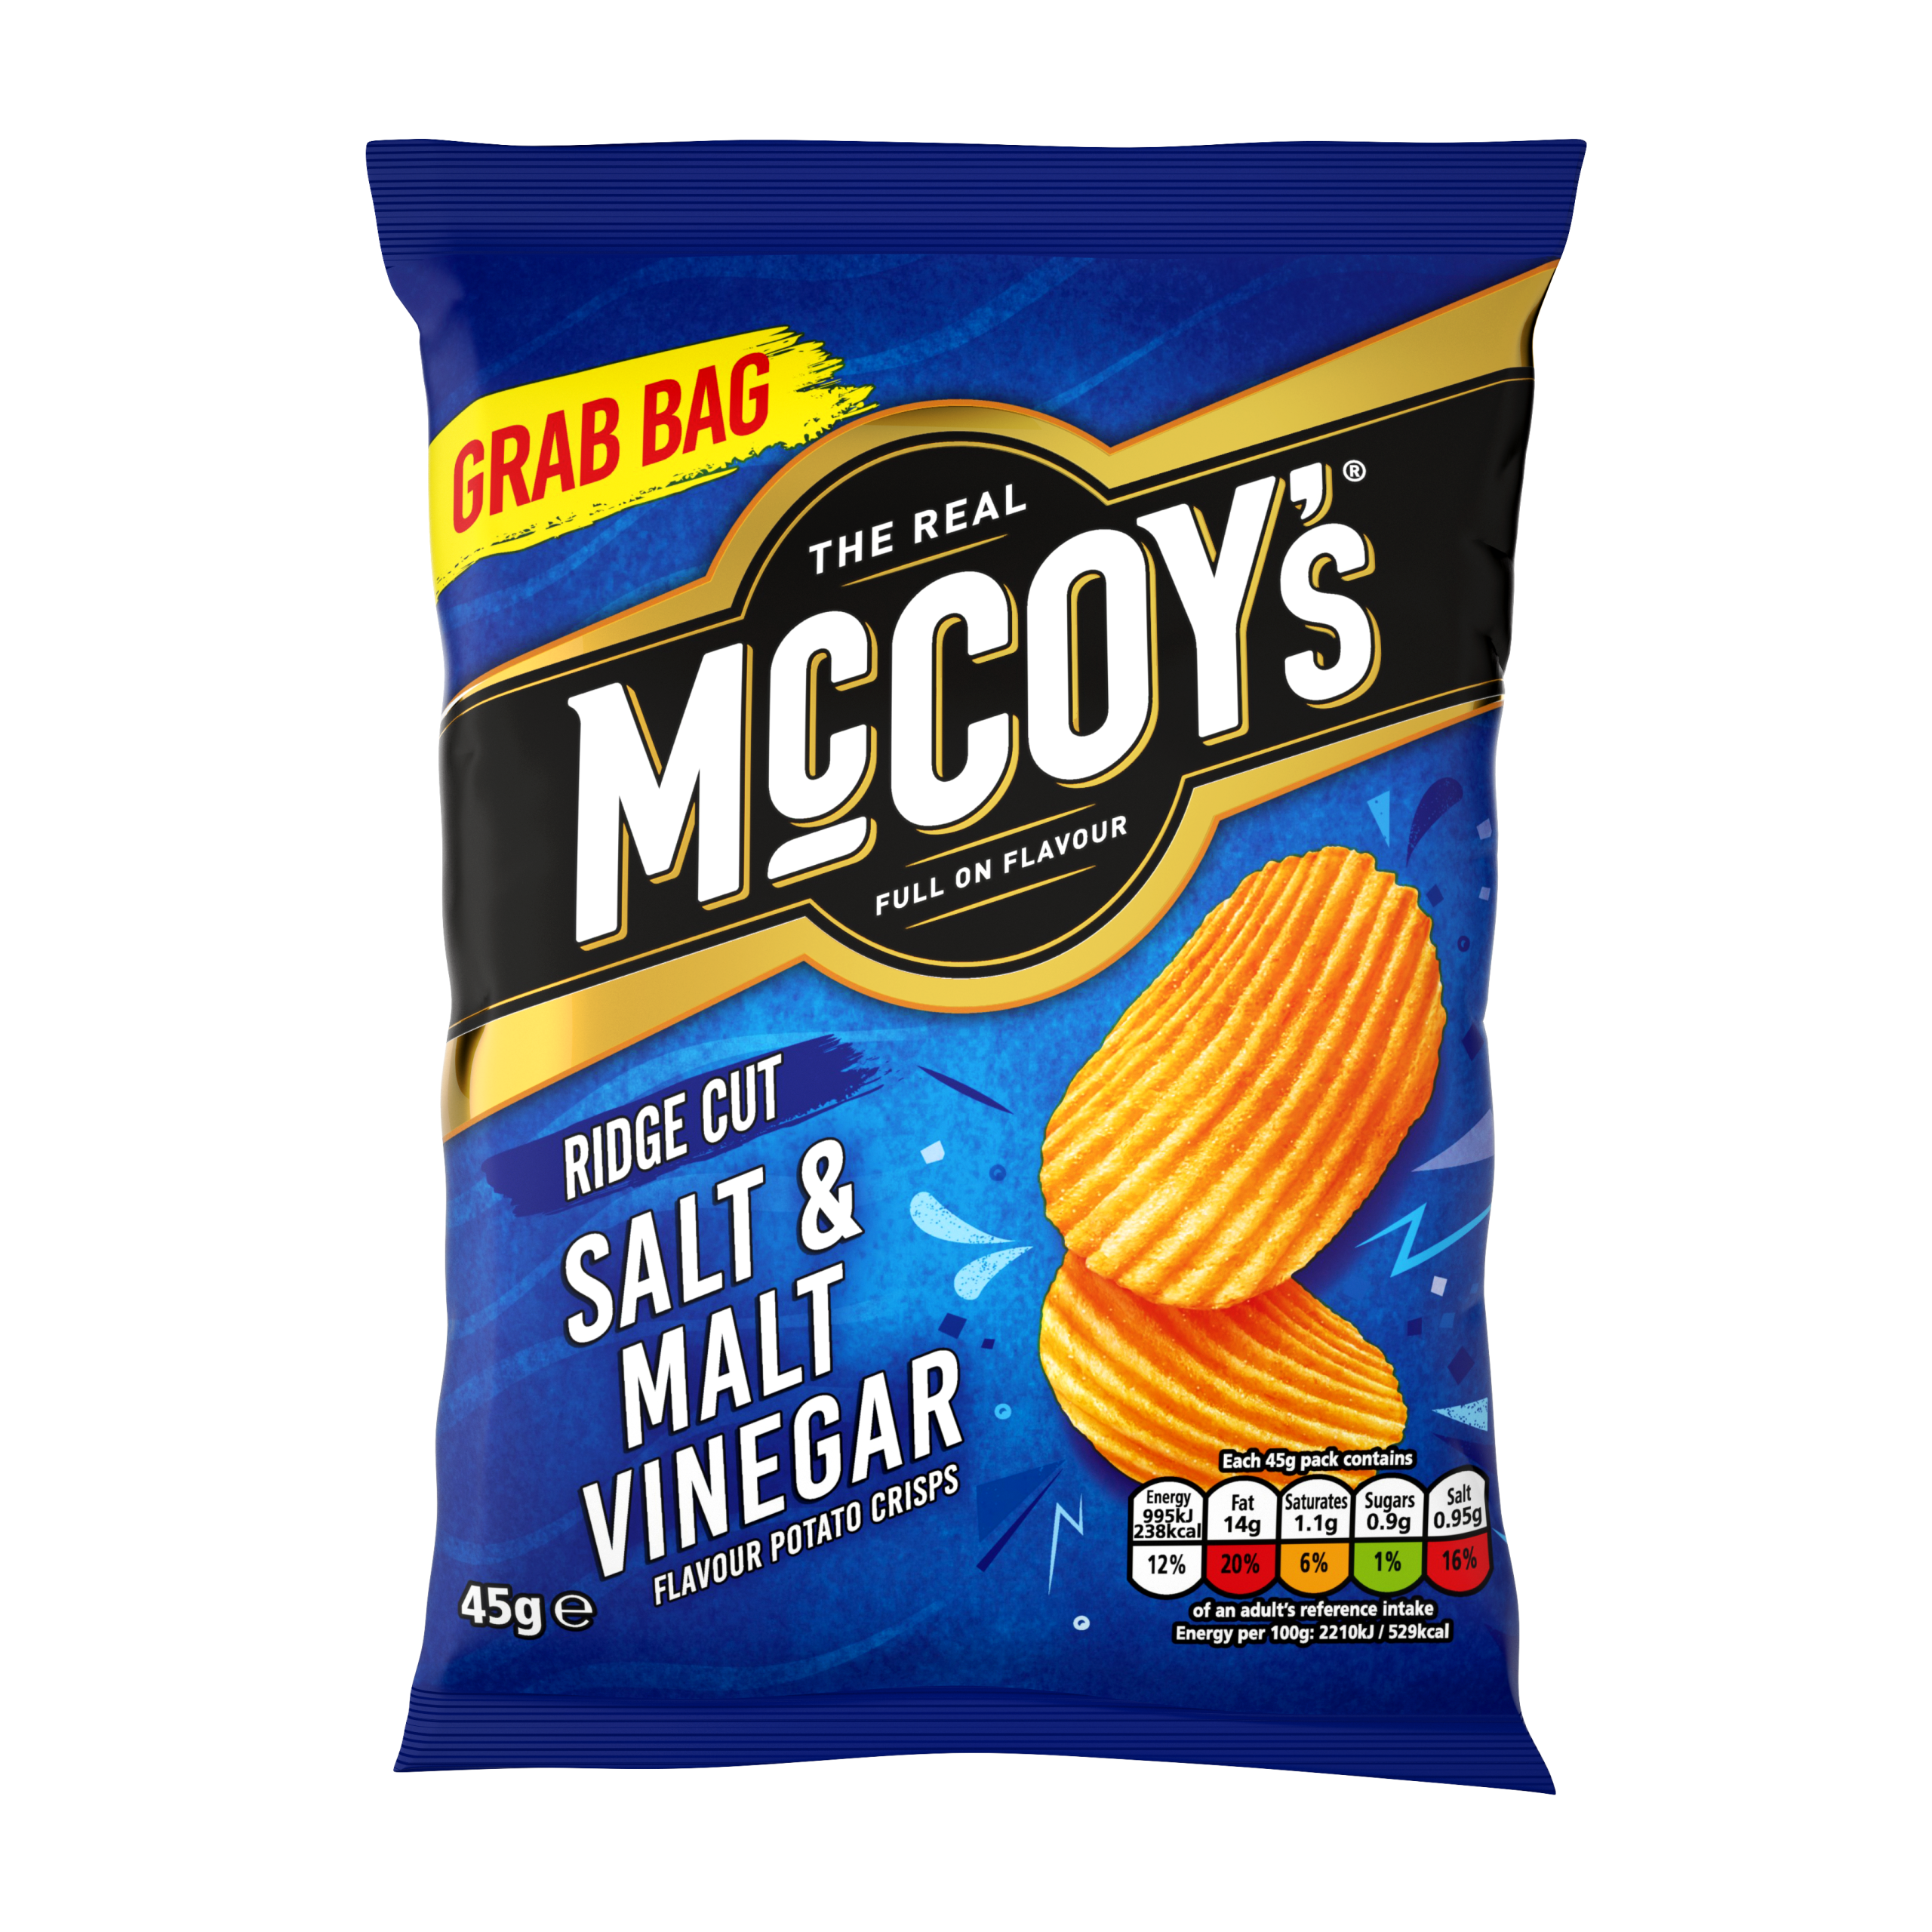 KP Snacks launches Capital FM Radio campaign for McCoy’s